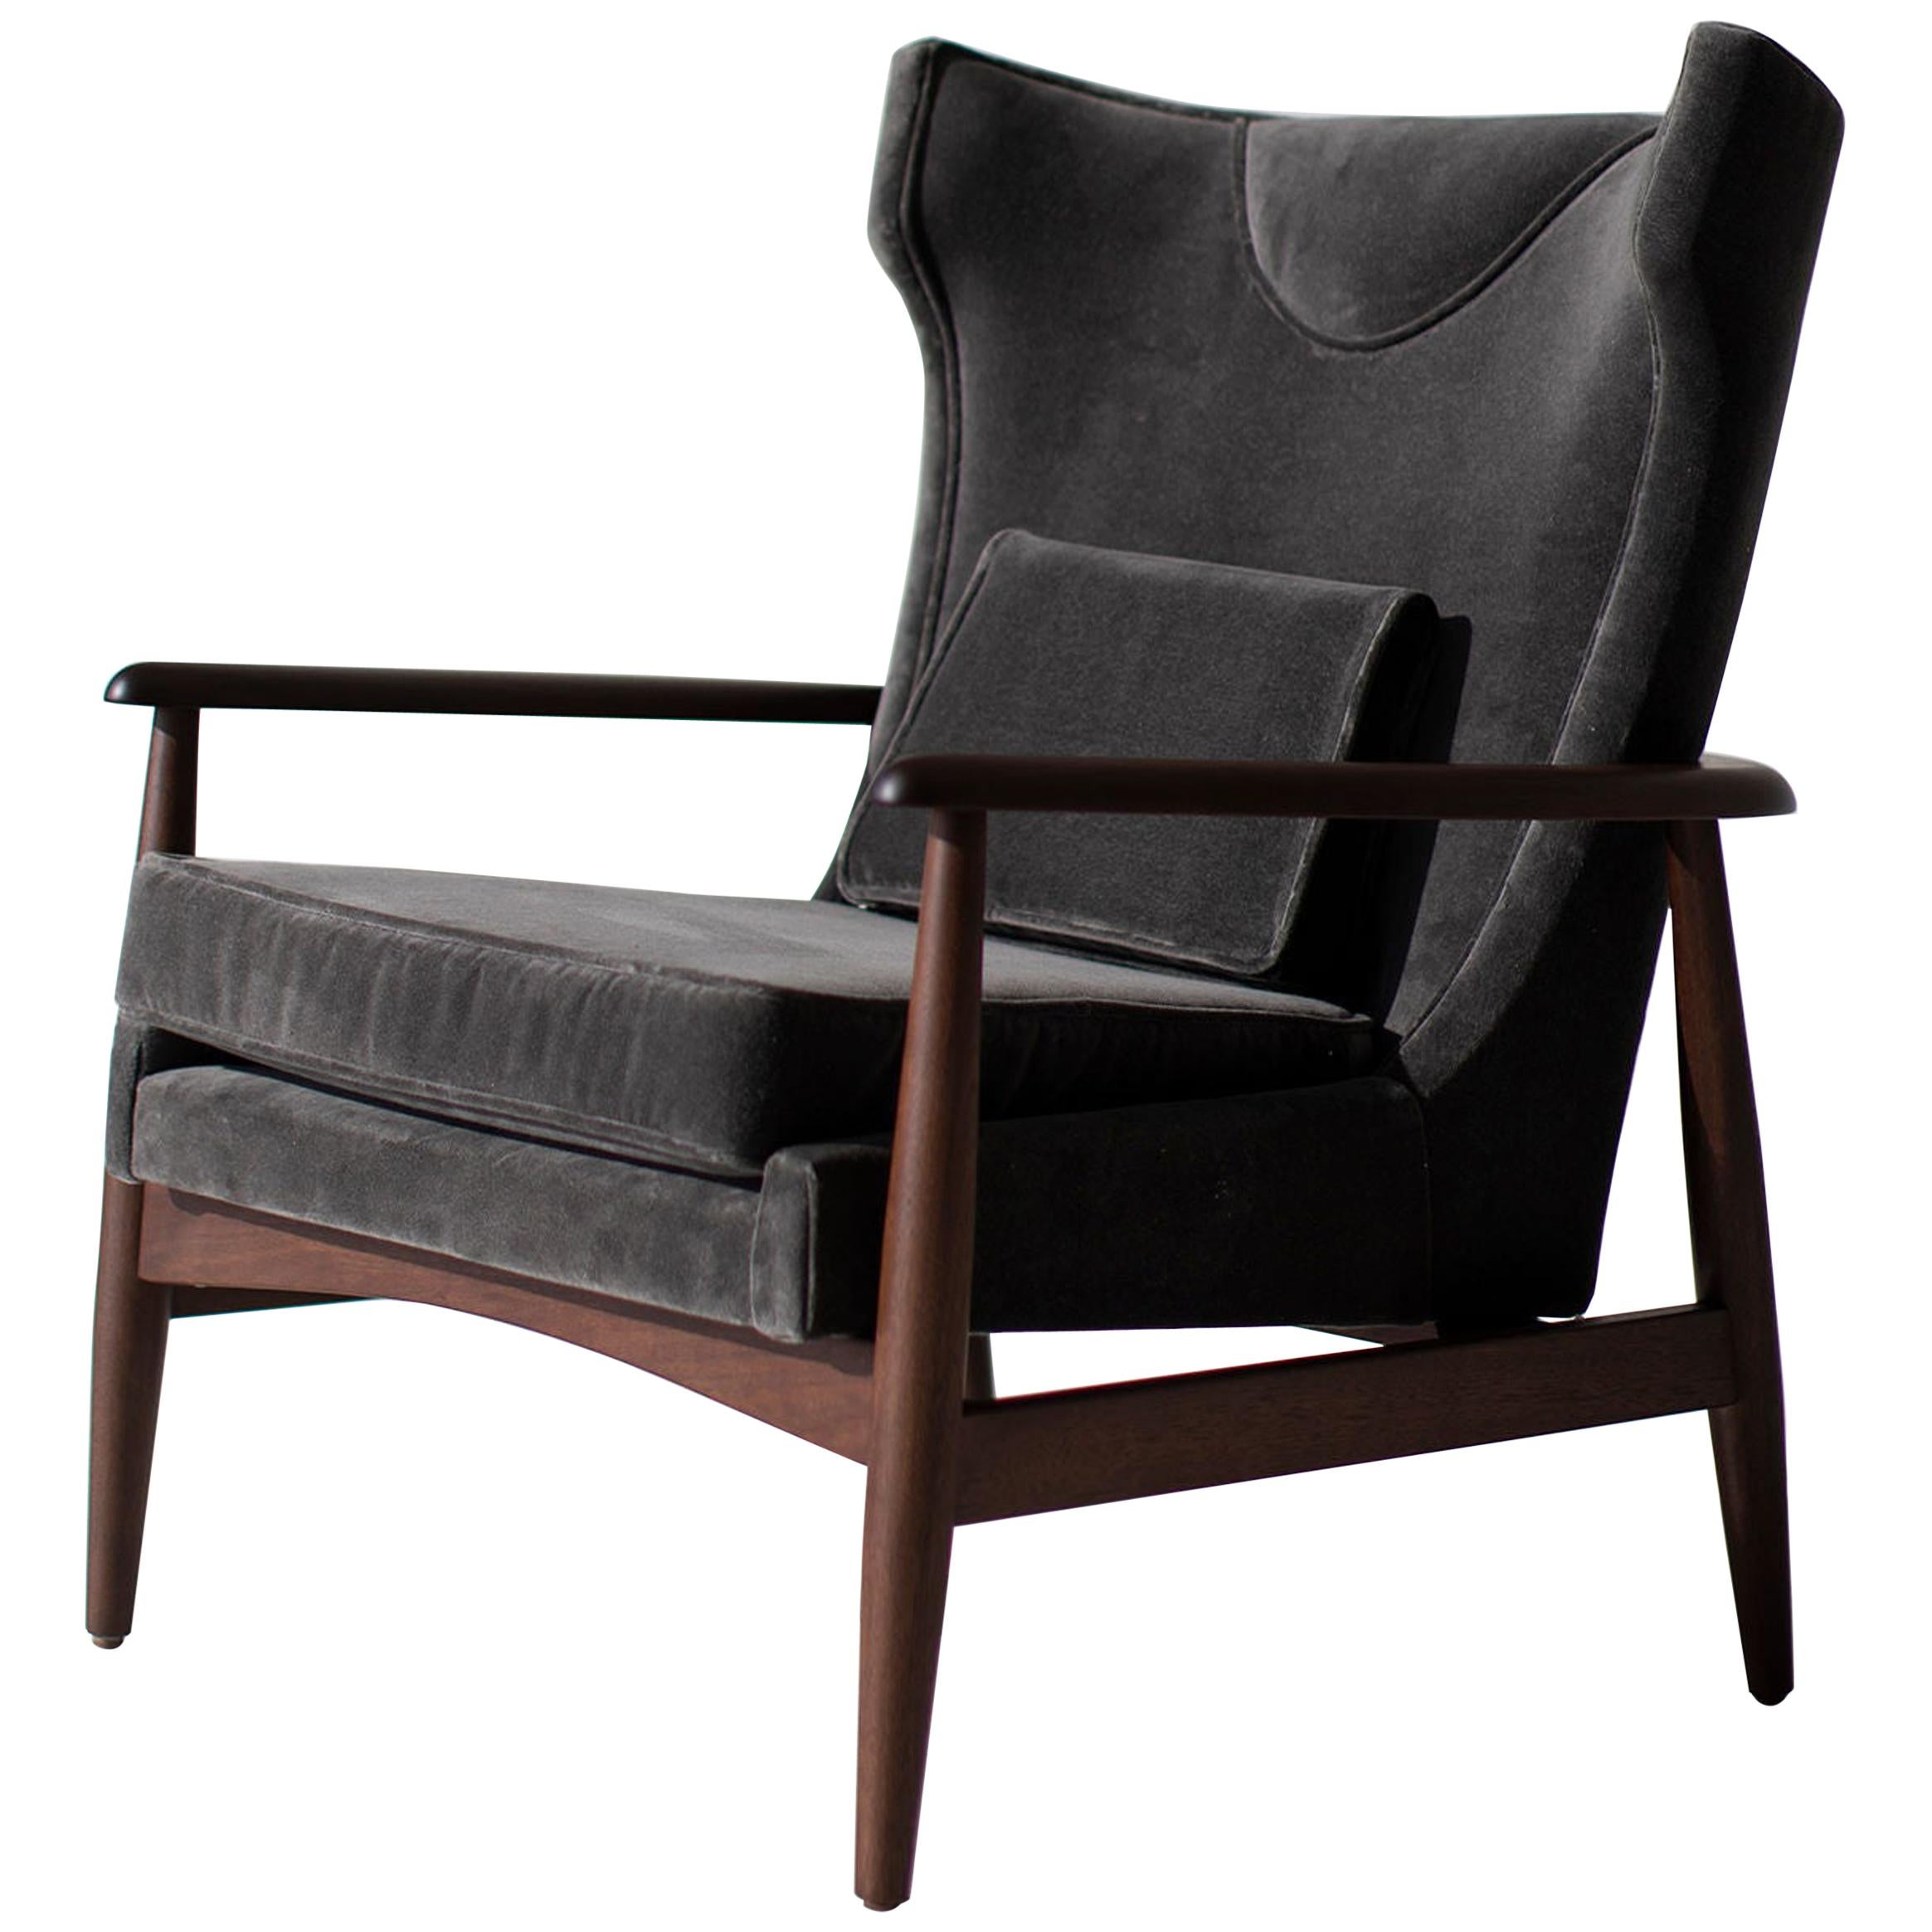 Lawrence Peabody Wing Chair for Craft Associates